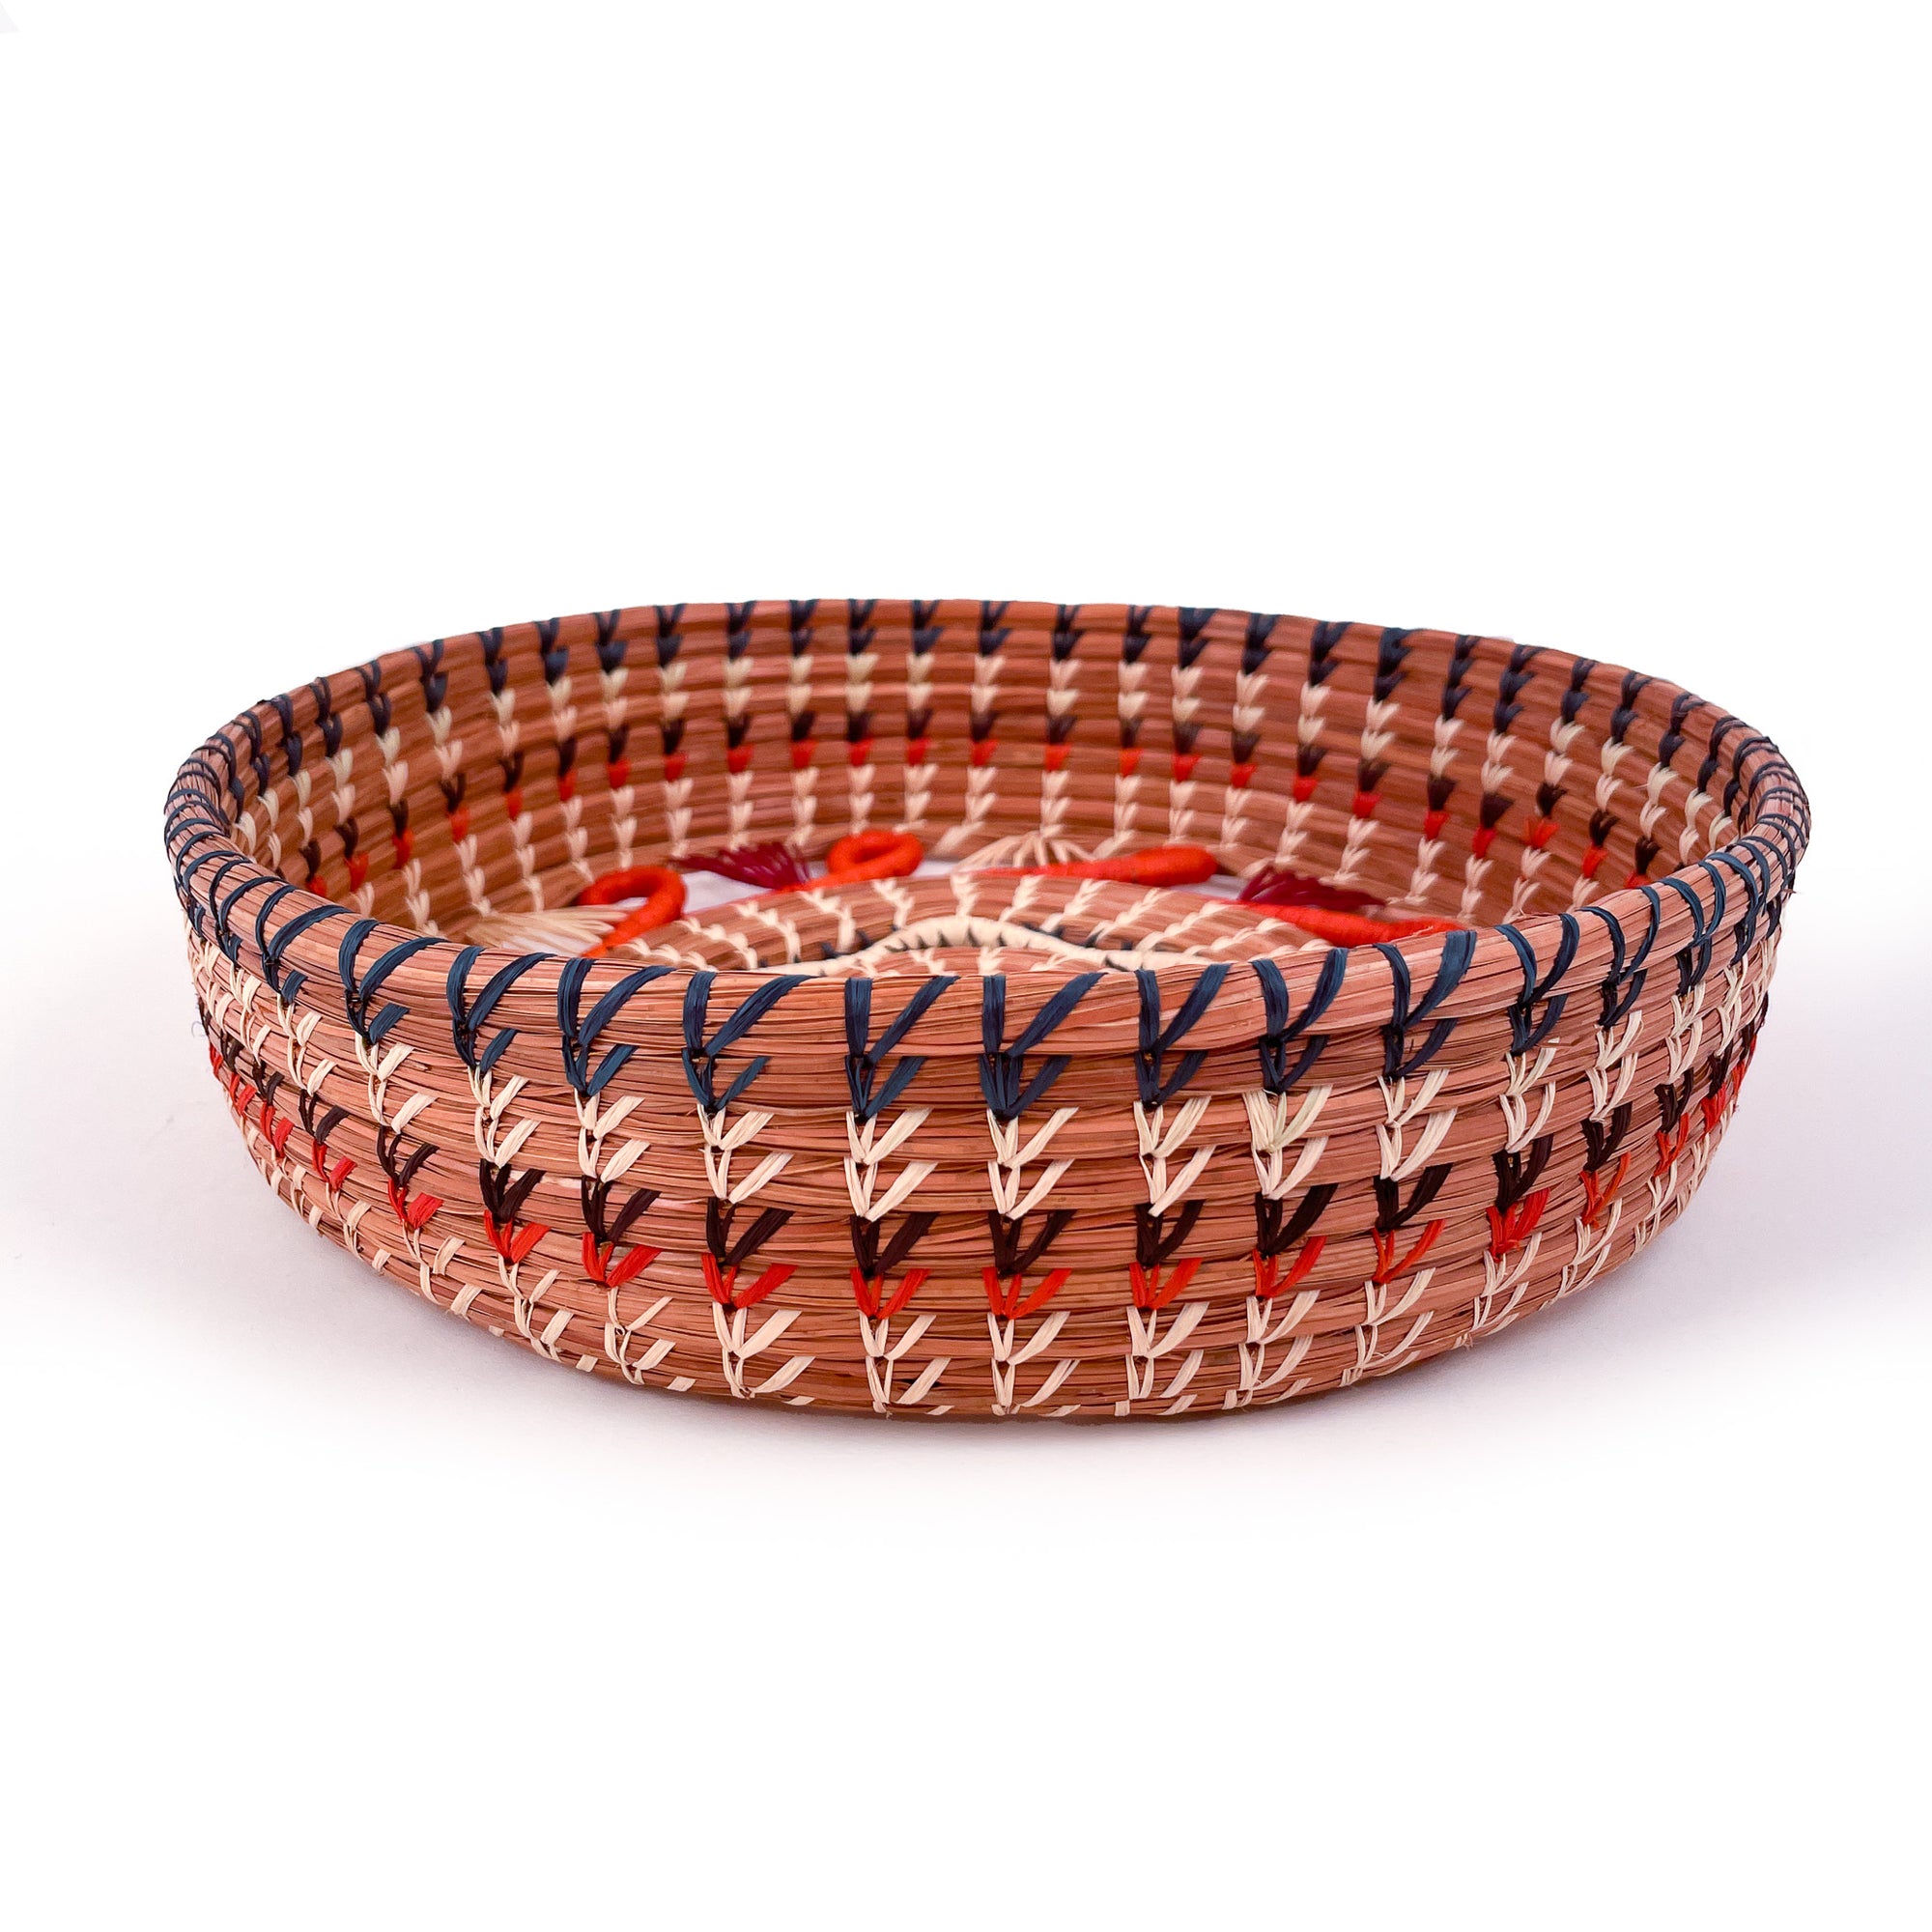 Front-facing view of Cristina Basket, a circular basket with star-shaped accent in center, surrounded by orange loop detail and intricate raffia stitching